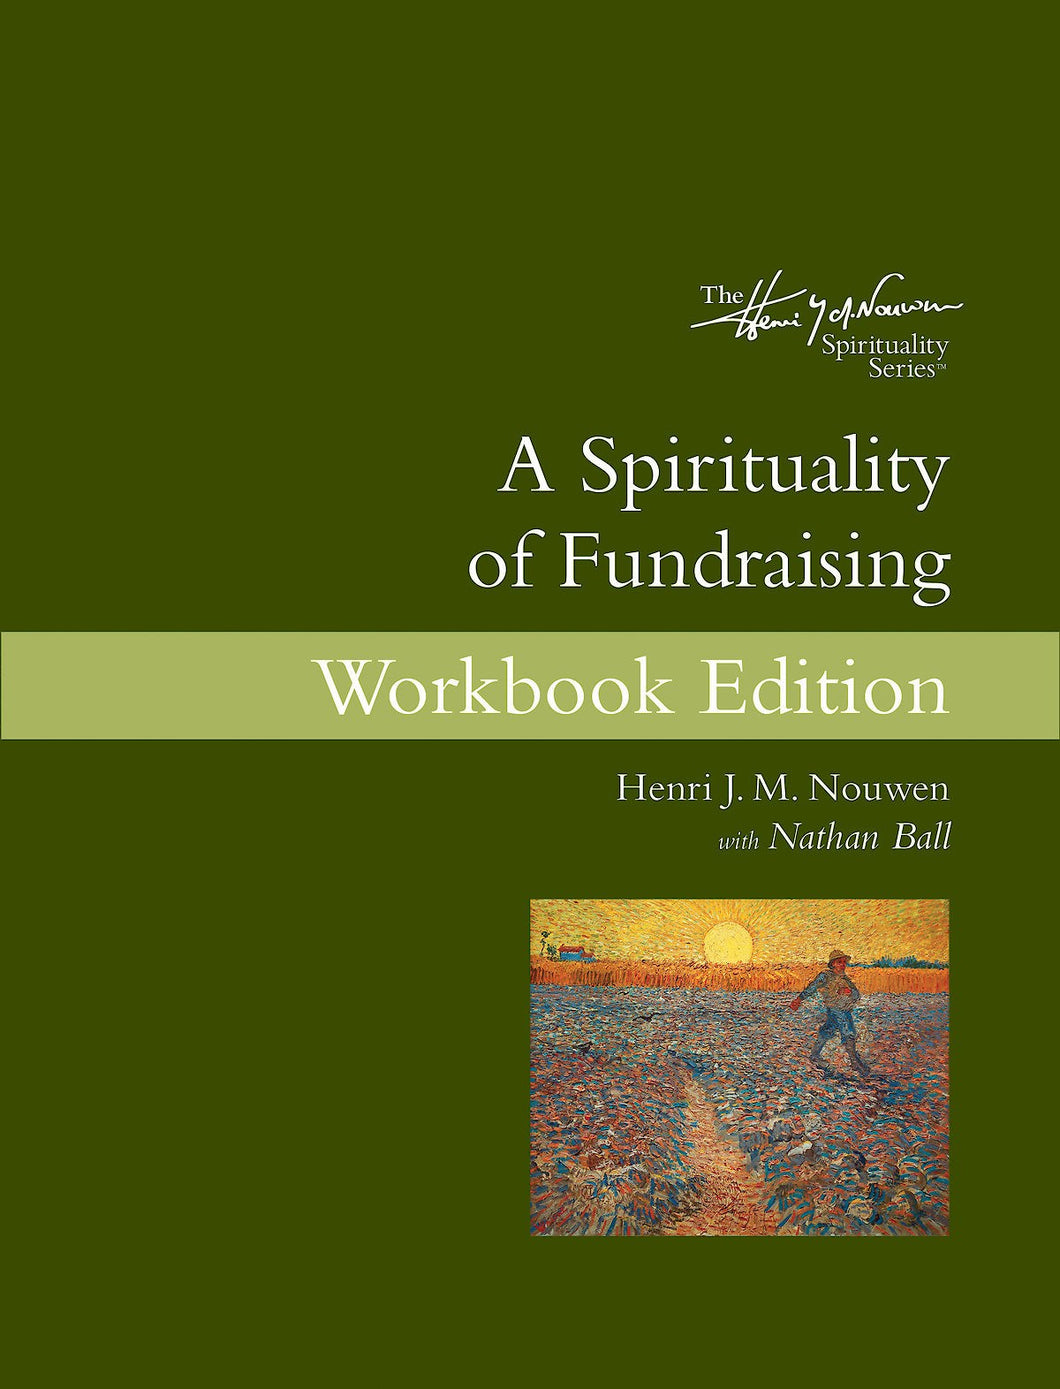 A Spirituality Of Fundraising (Workbook Edition)